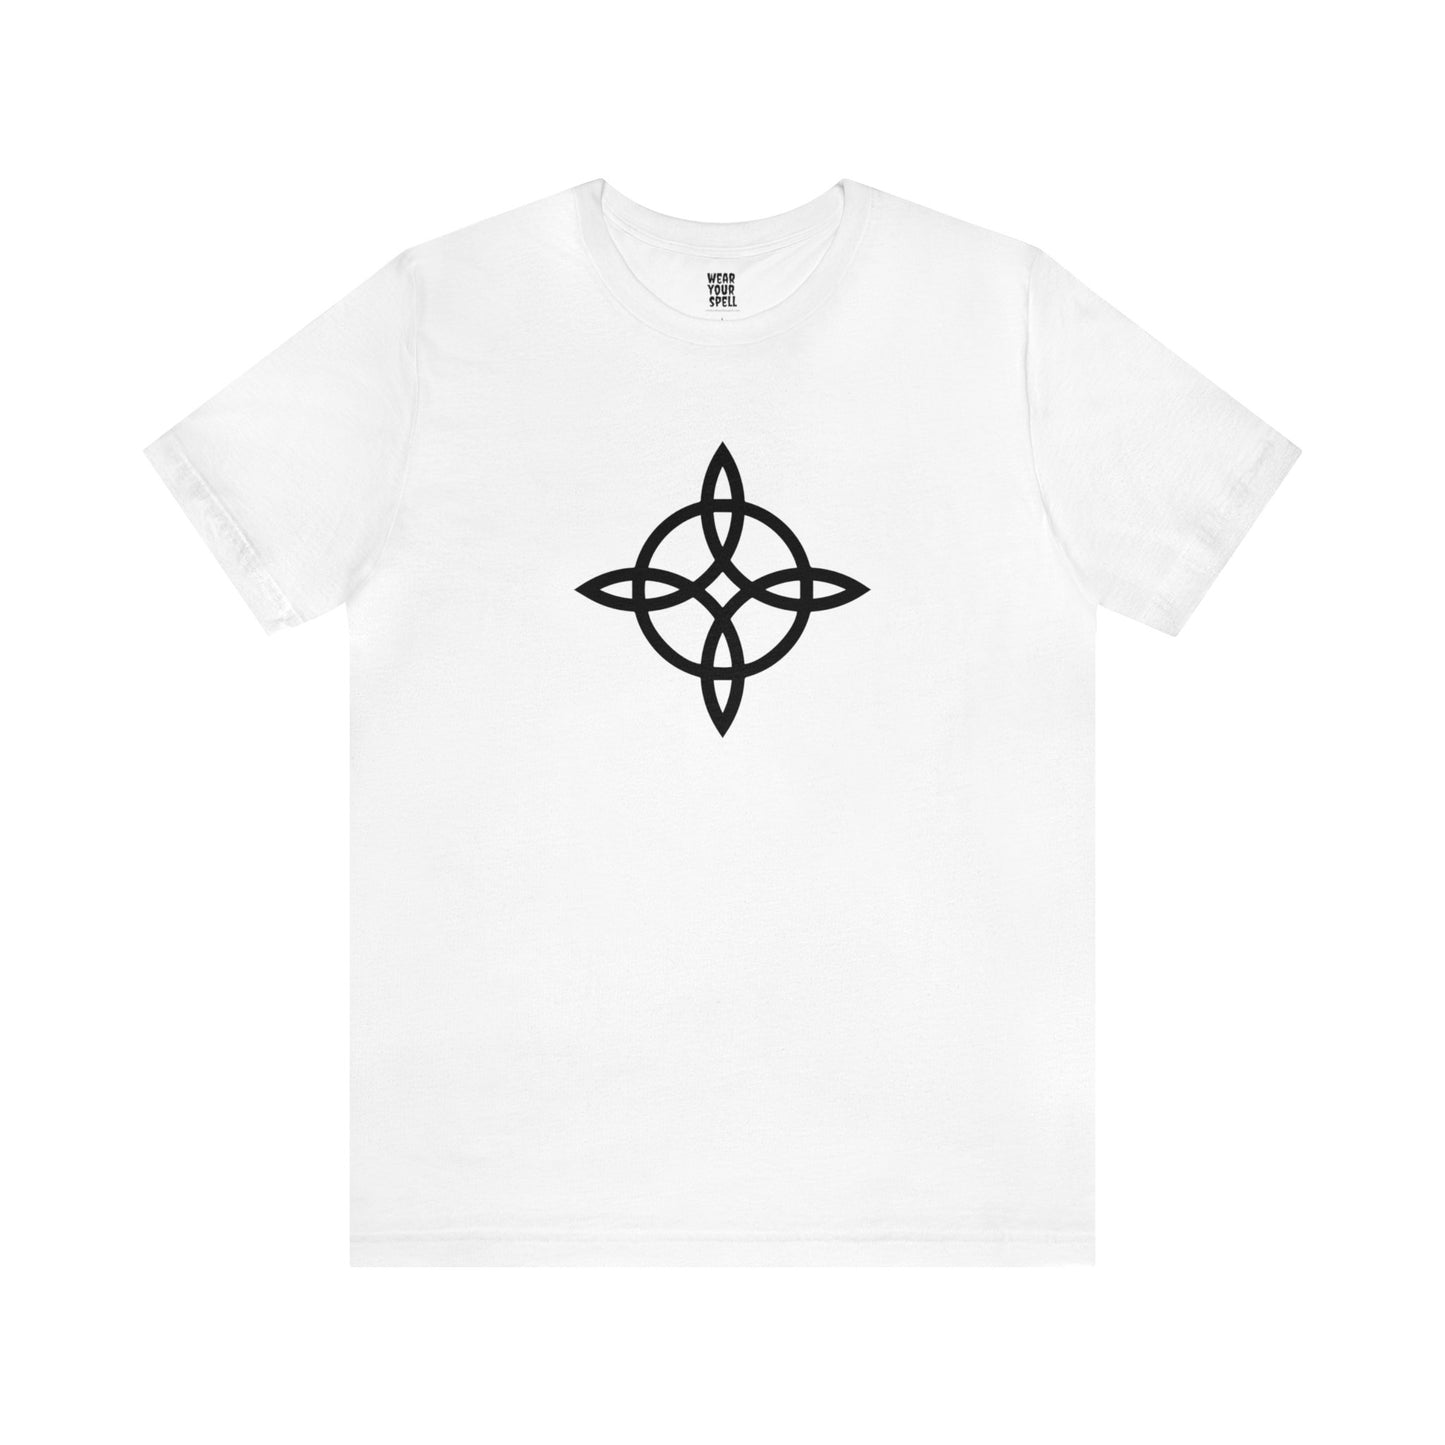 WEAR YOUR SPELL Witch T-shirt. Witch Charm Empowerment Spell. Magickal correspondence: Candle, Amethyst & Lavender